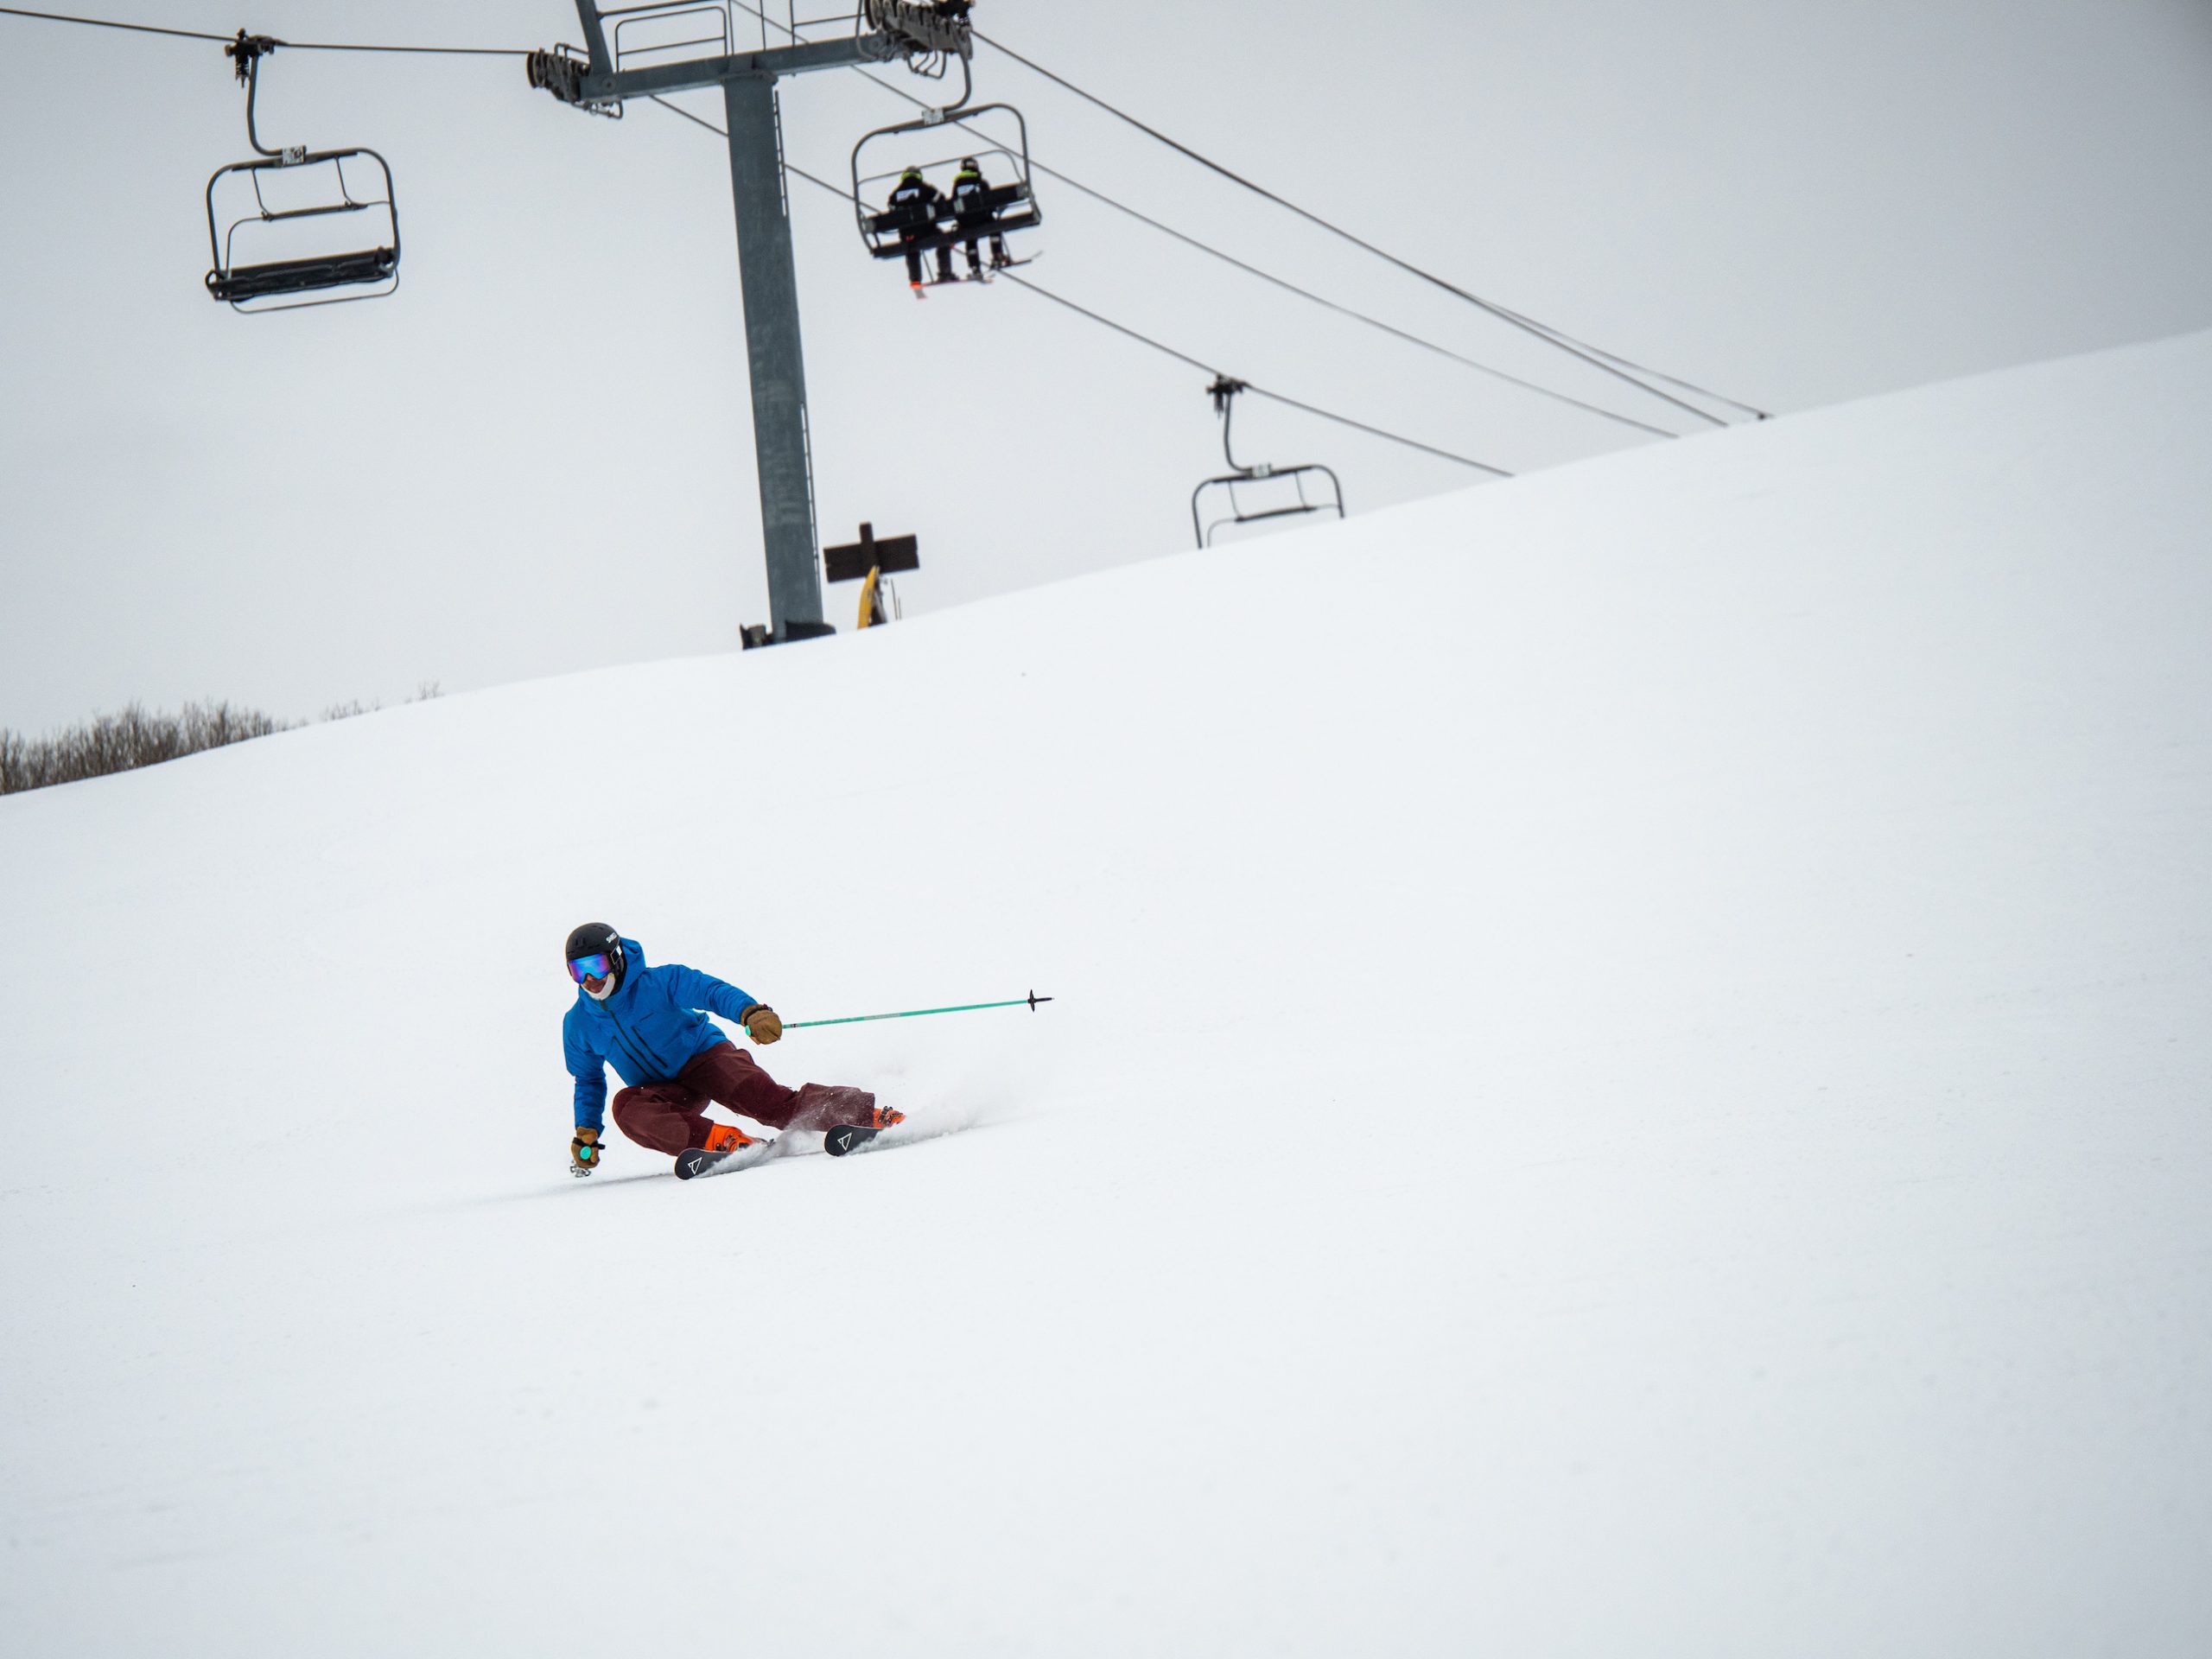 A person skis down a gentle slope called warming house hill at crested butte mountain resort. Warming House Hill heads to the base area 